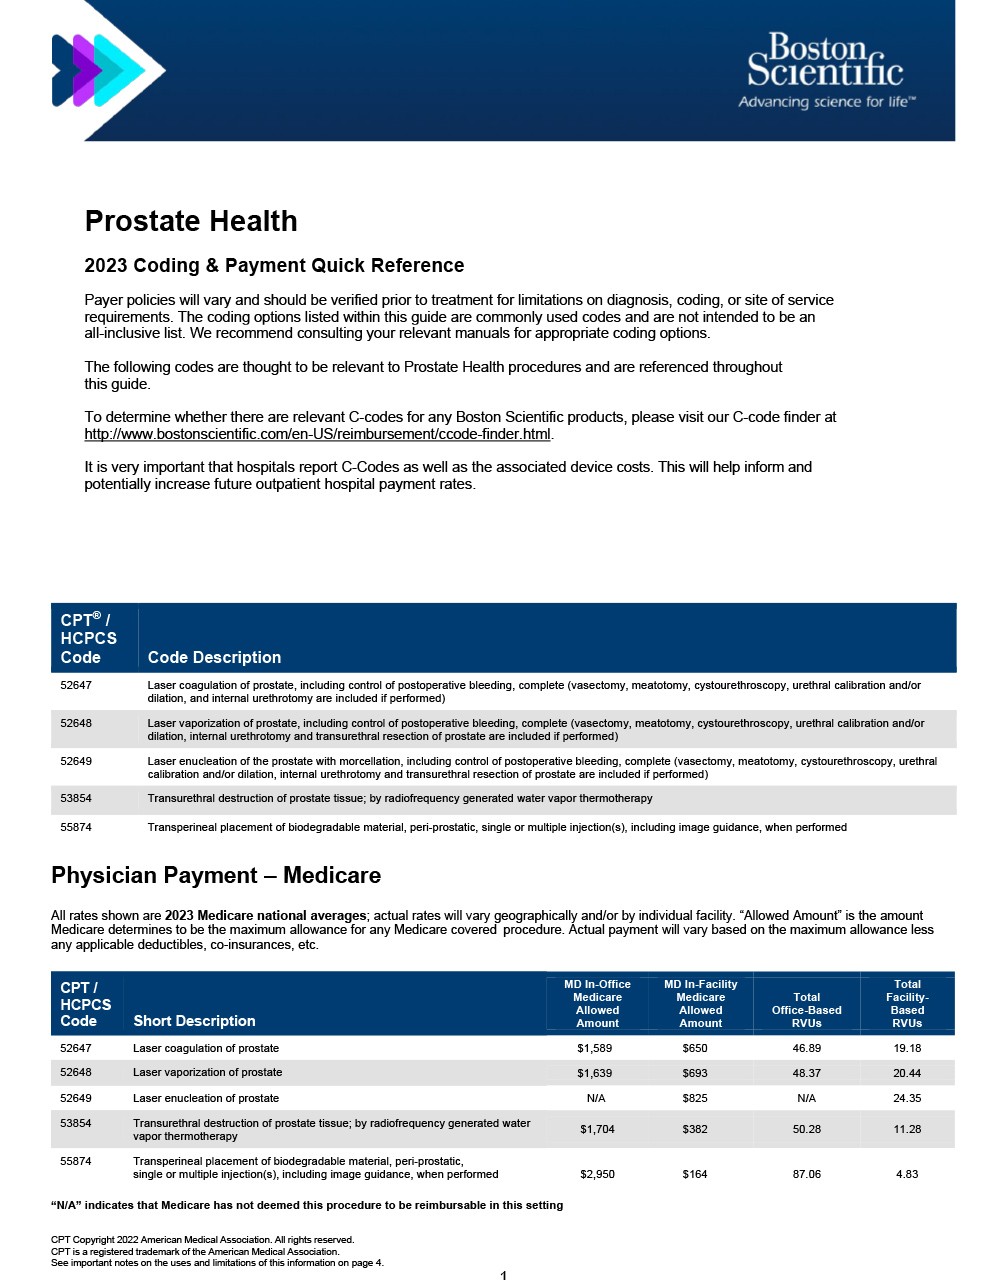 Prostate Health Coding and Payment Guide